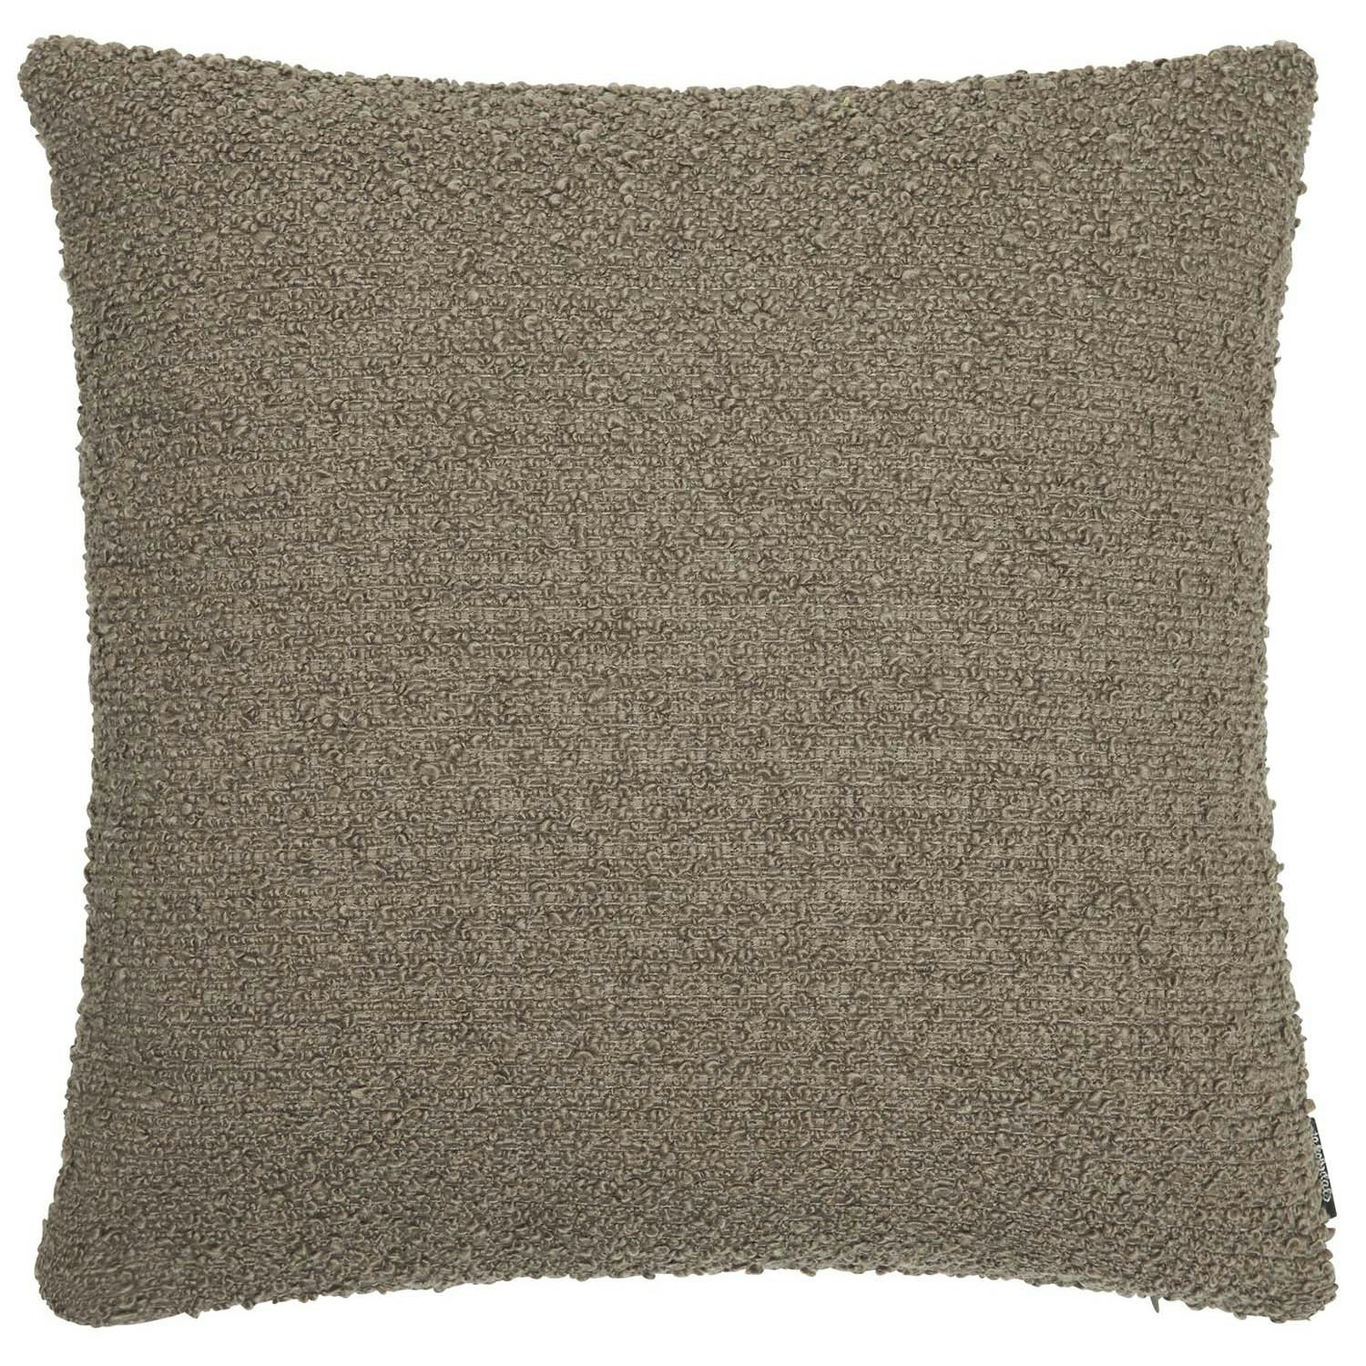 Boucle moment Cushion Cover 60X60 cm, Light Brown